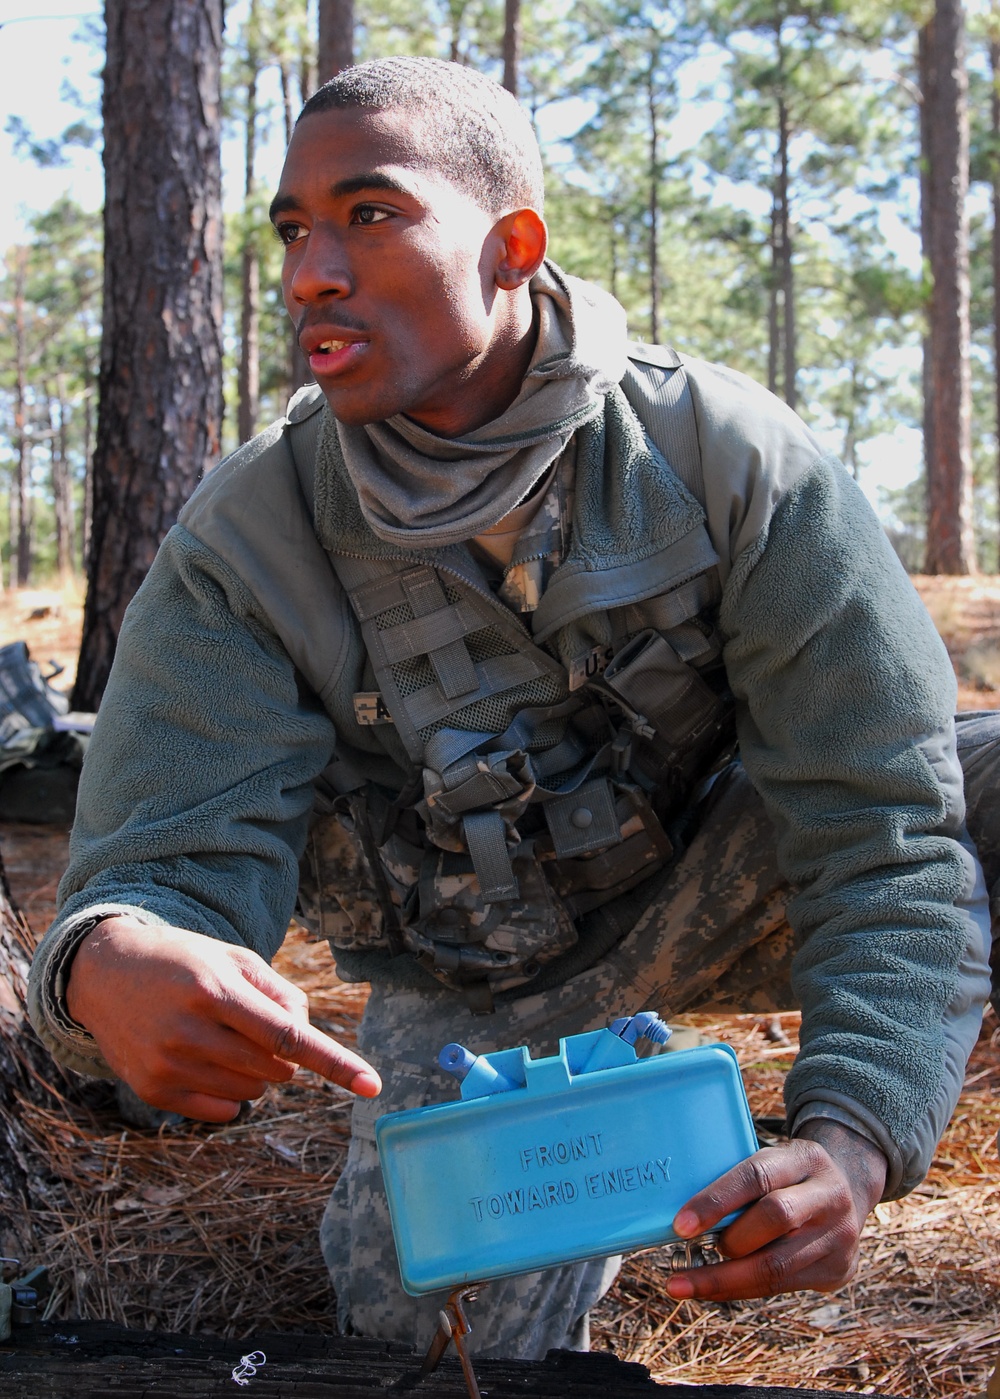 Reserve soldiers hone warrior skills at Fort Bragg